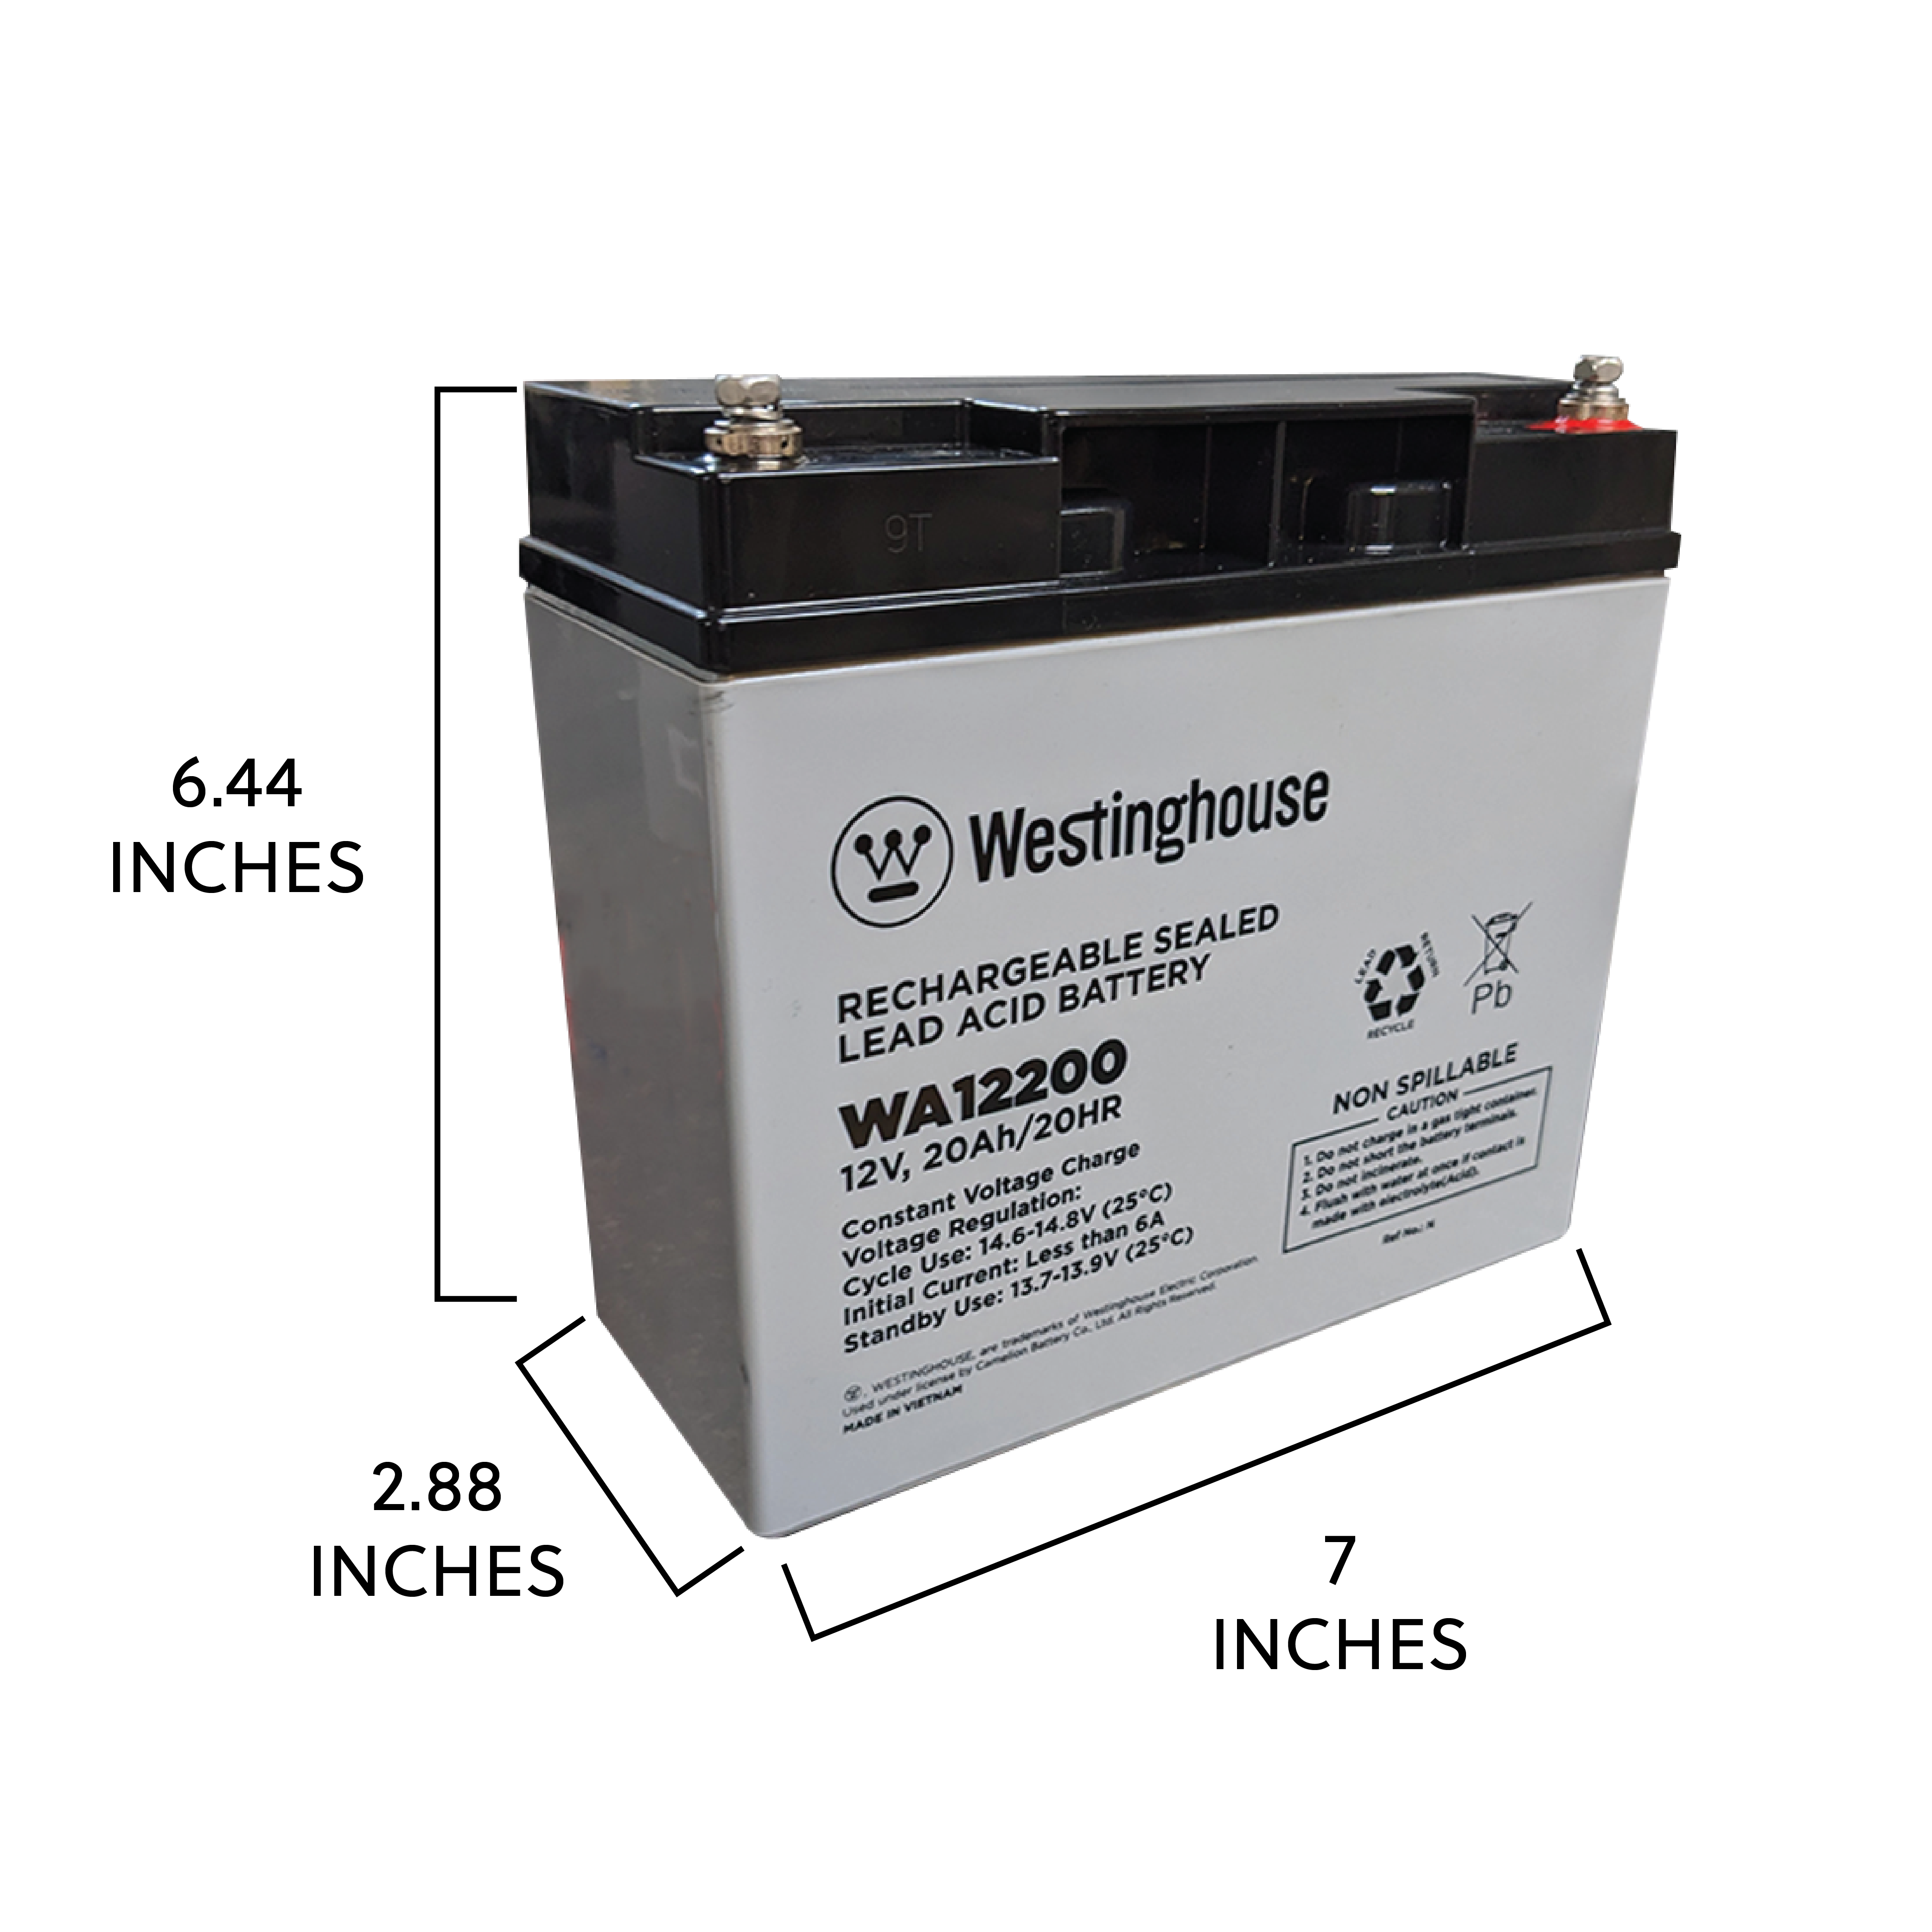 Westinghouse WA12200N-F13, 12V 20Ah F13 Terminal, Sealed Lead Acid Rechargeable Battery